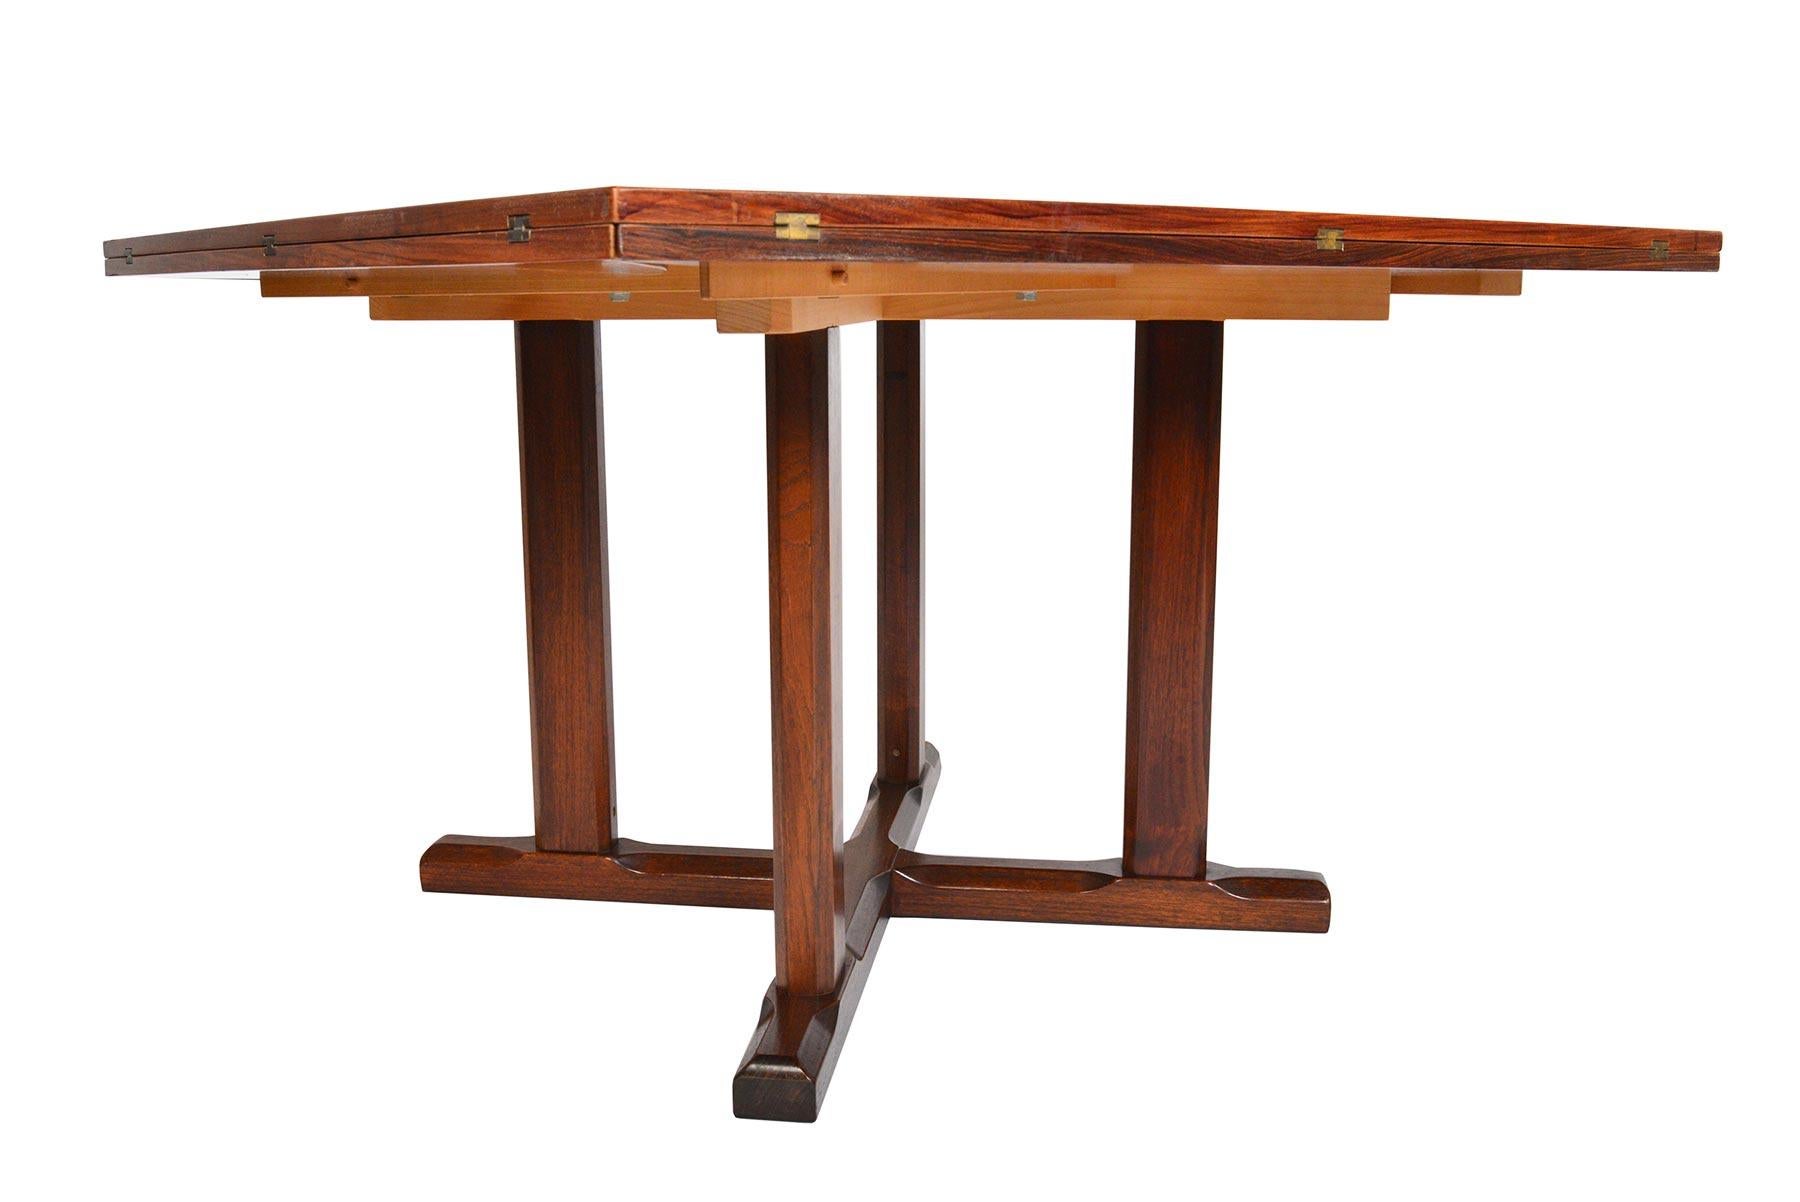 A true shape shifter of design, this Danish modern rosewood dining table by Vejle Stole Møbelfabrik expands and changes form! The square tabletop features triangular rosewood inlays. Each table side offers a hinged leaf supported by sliding runner